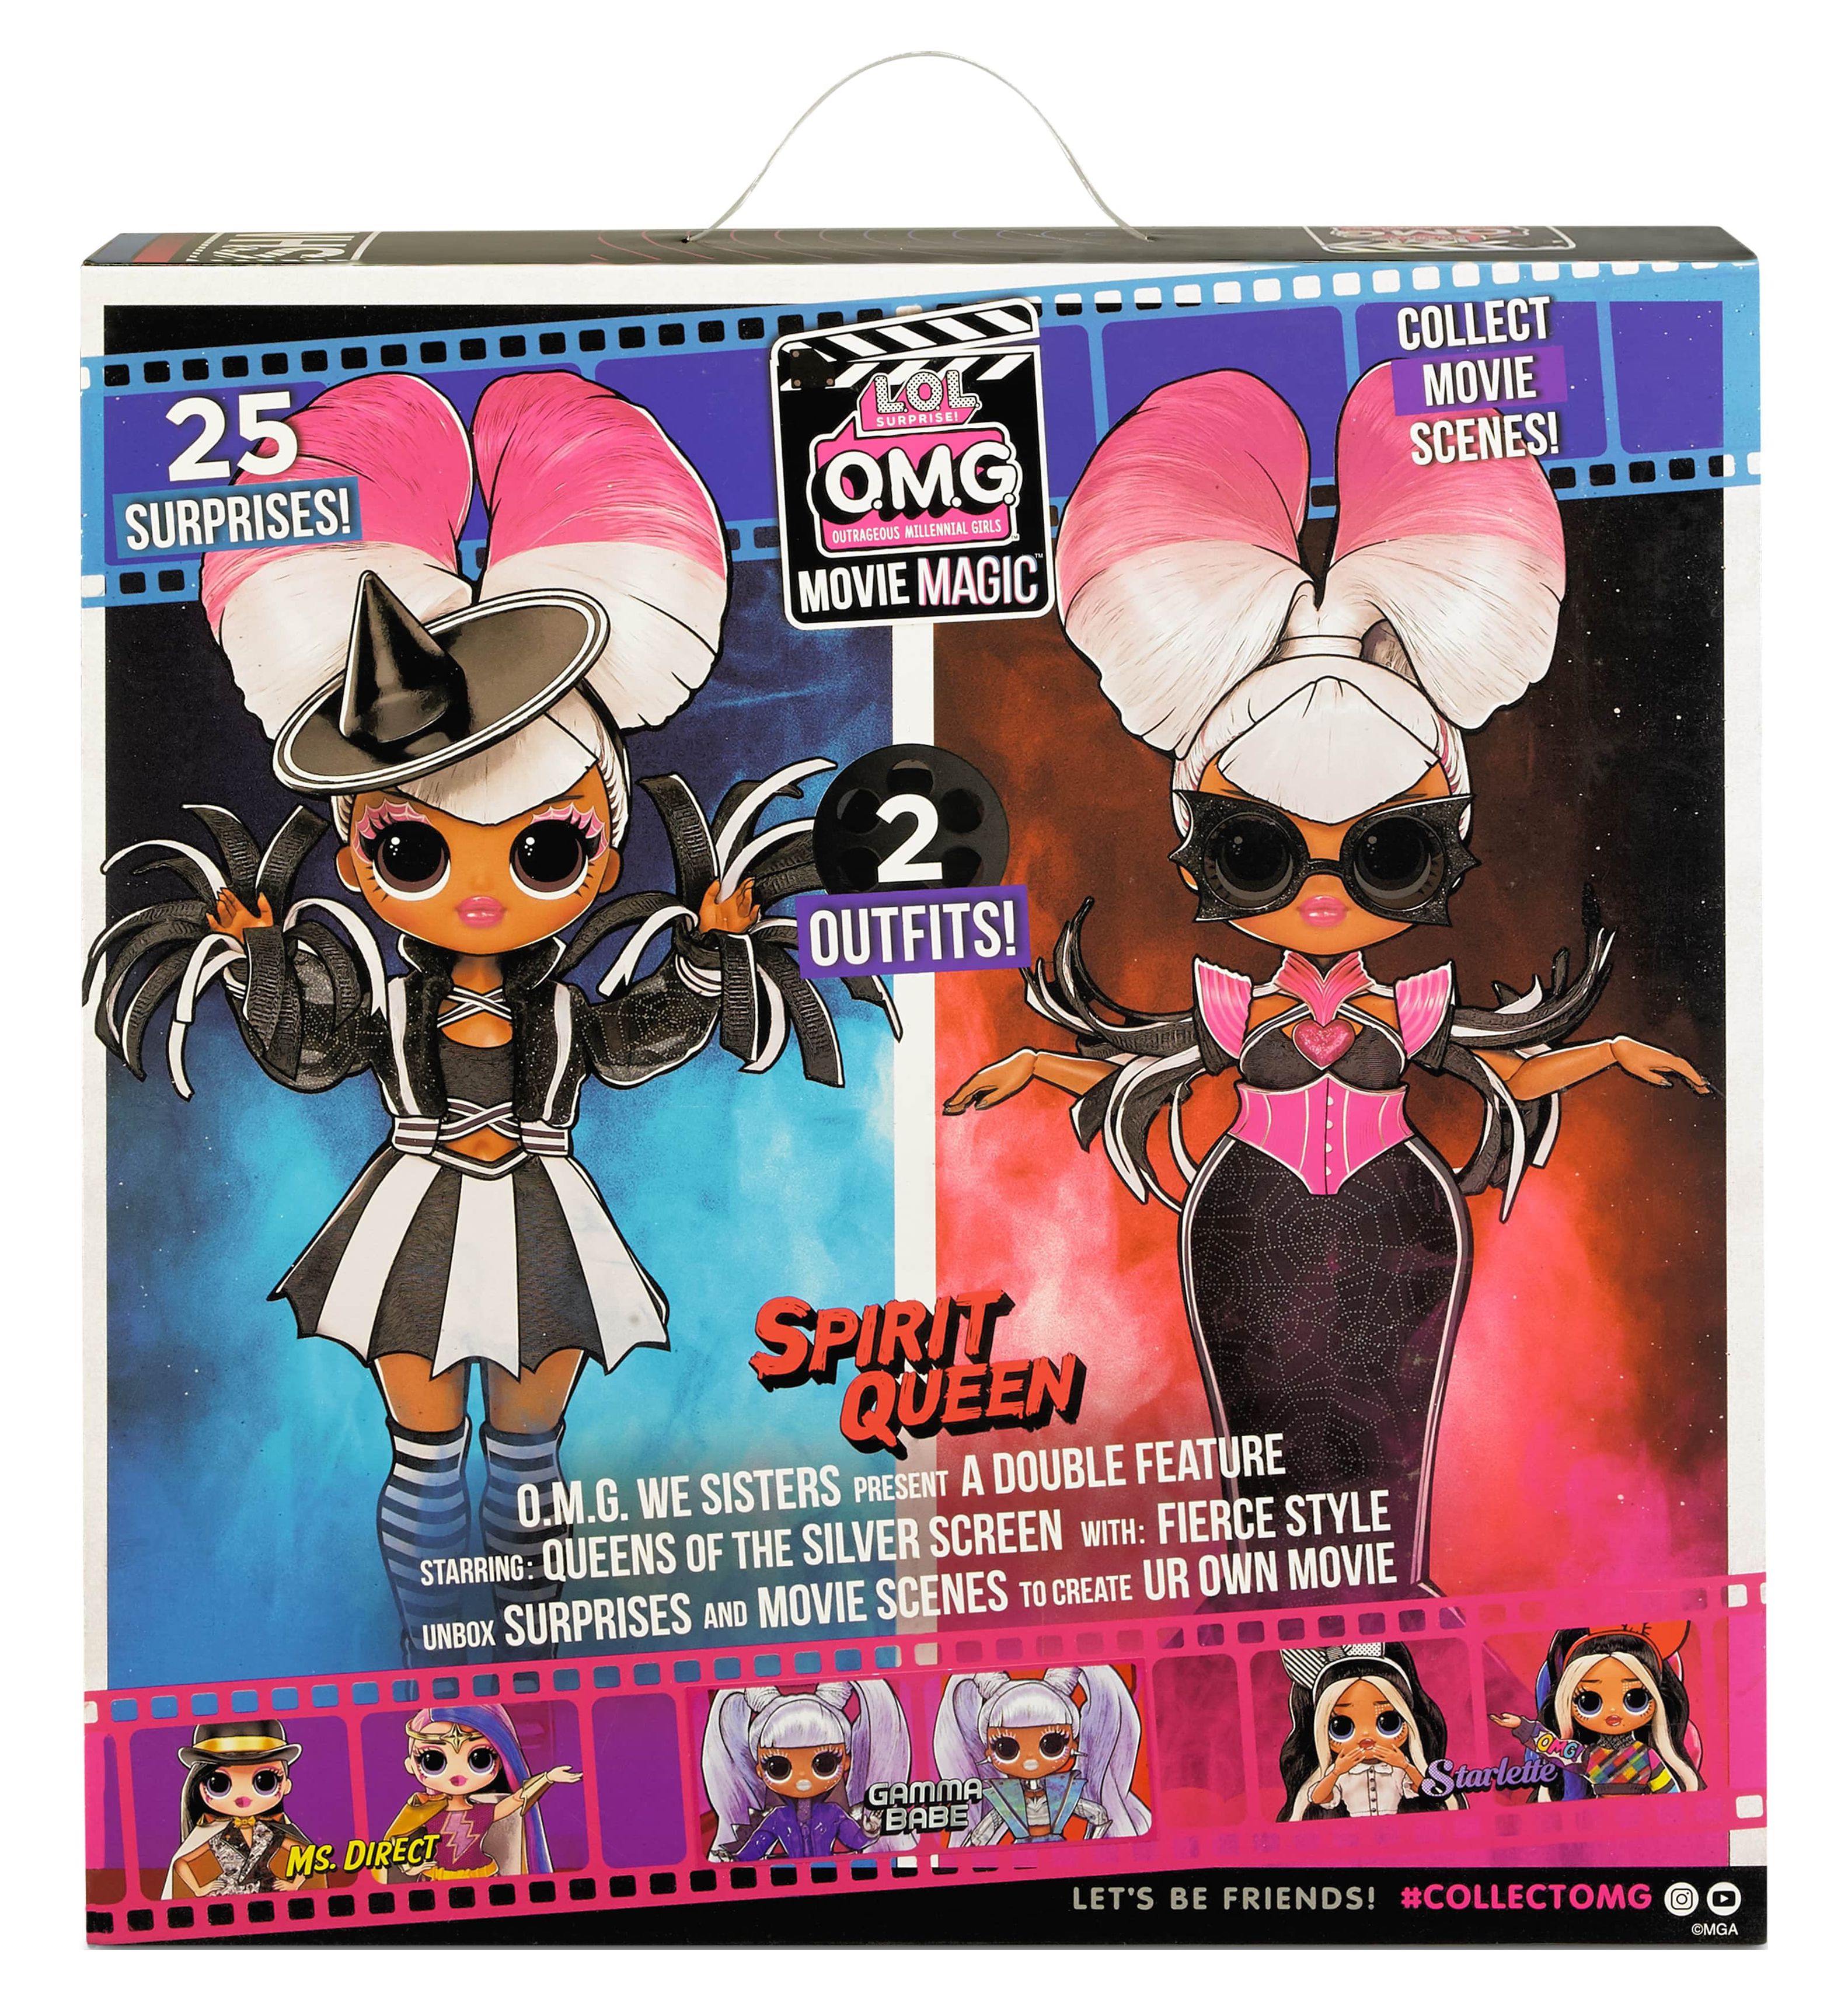 LOL Surprise Omg Movie Magic Spirit Queen Fashion Doll with 25 Surprises Including 2 Fashion Outfits, 3D Glasses, Movie Accessories And Reusable Playset – Great Gift for Girls Ages 4+ - image 5 of 7